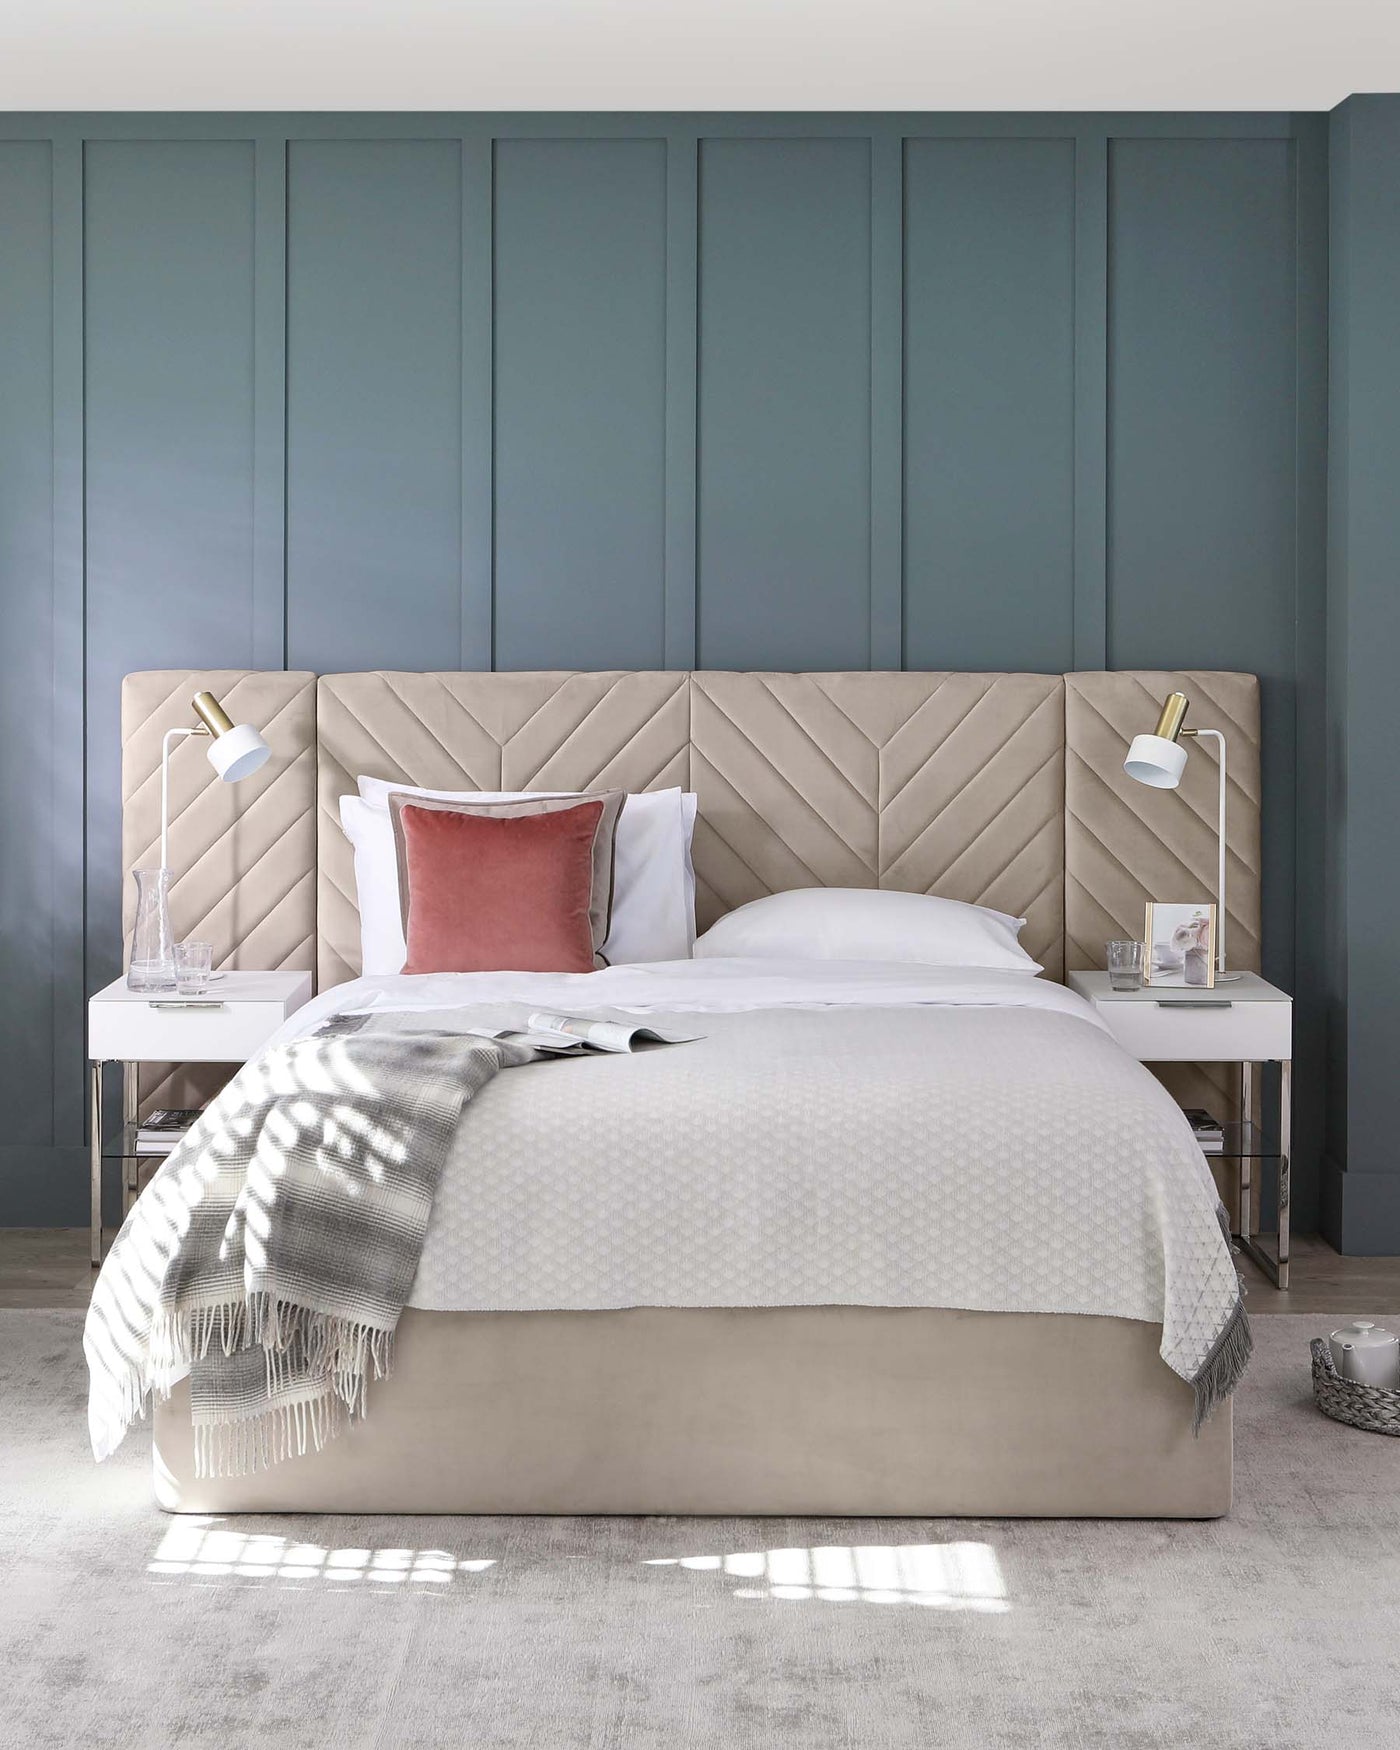 Elegant upholstered bed with an extended, tufted headboard in a herringbone pattern, flanked by two white, minimalist nightstands with gold-accented reading lamps. Bed is adorned with crisp white linens, a textured white comforter, and accented by a single dusty rose pillow. A grey and white patterned throw blanket casually drapes over the foot of the bed. The bed and nightstands are set against a room with dark teal panelled walls and a soft grey carpet.